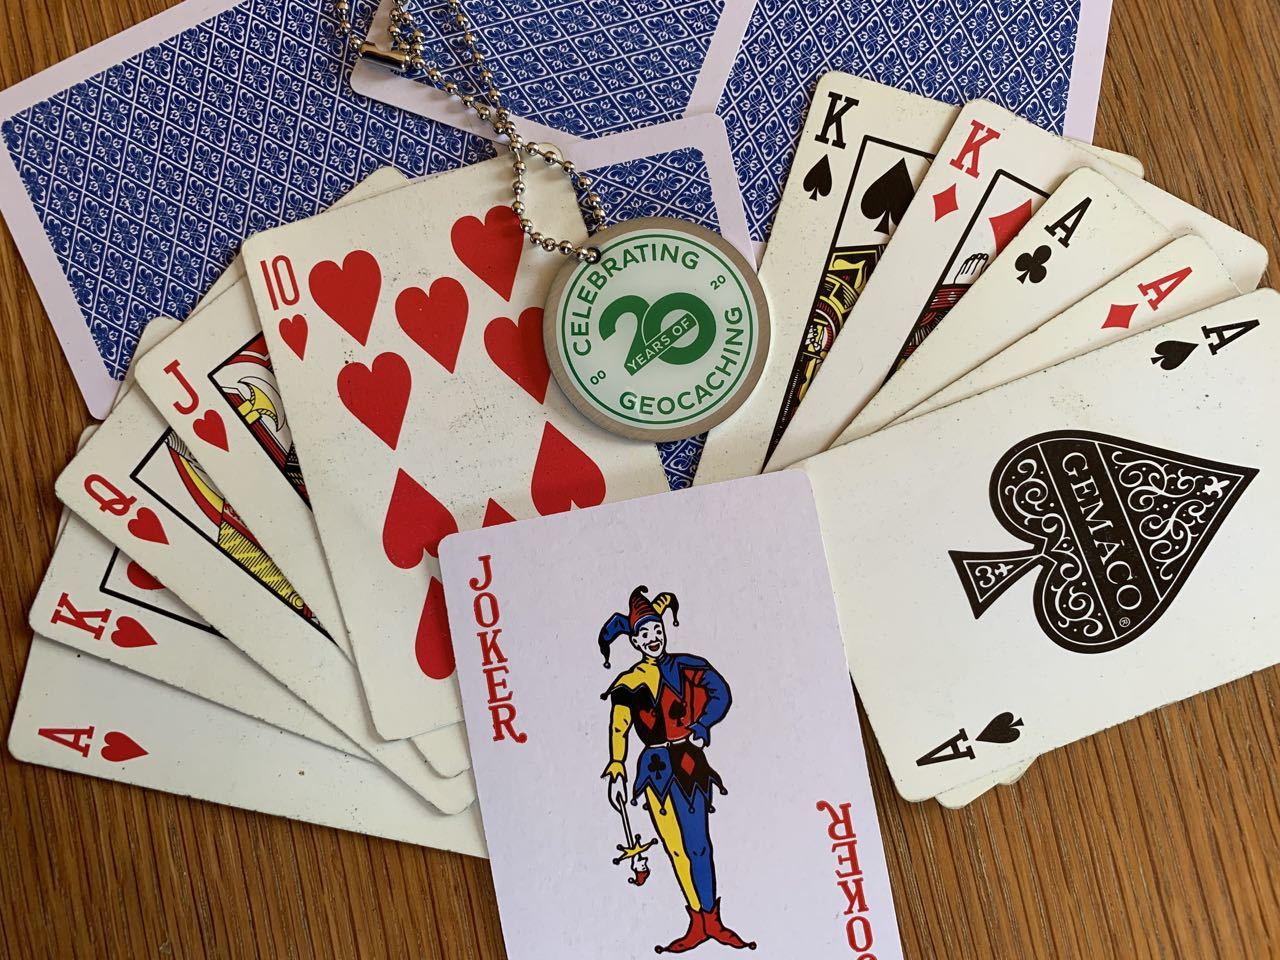 Celebrating 20 Years Tag on playing cards